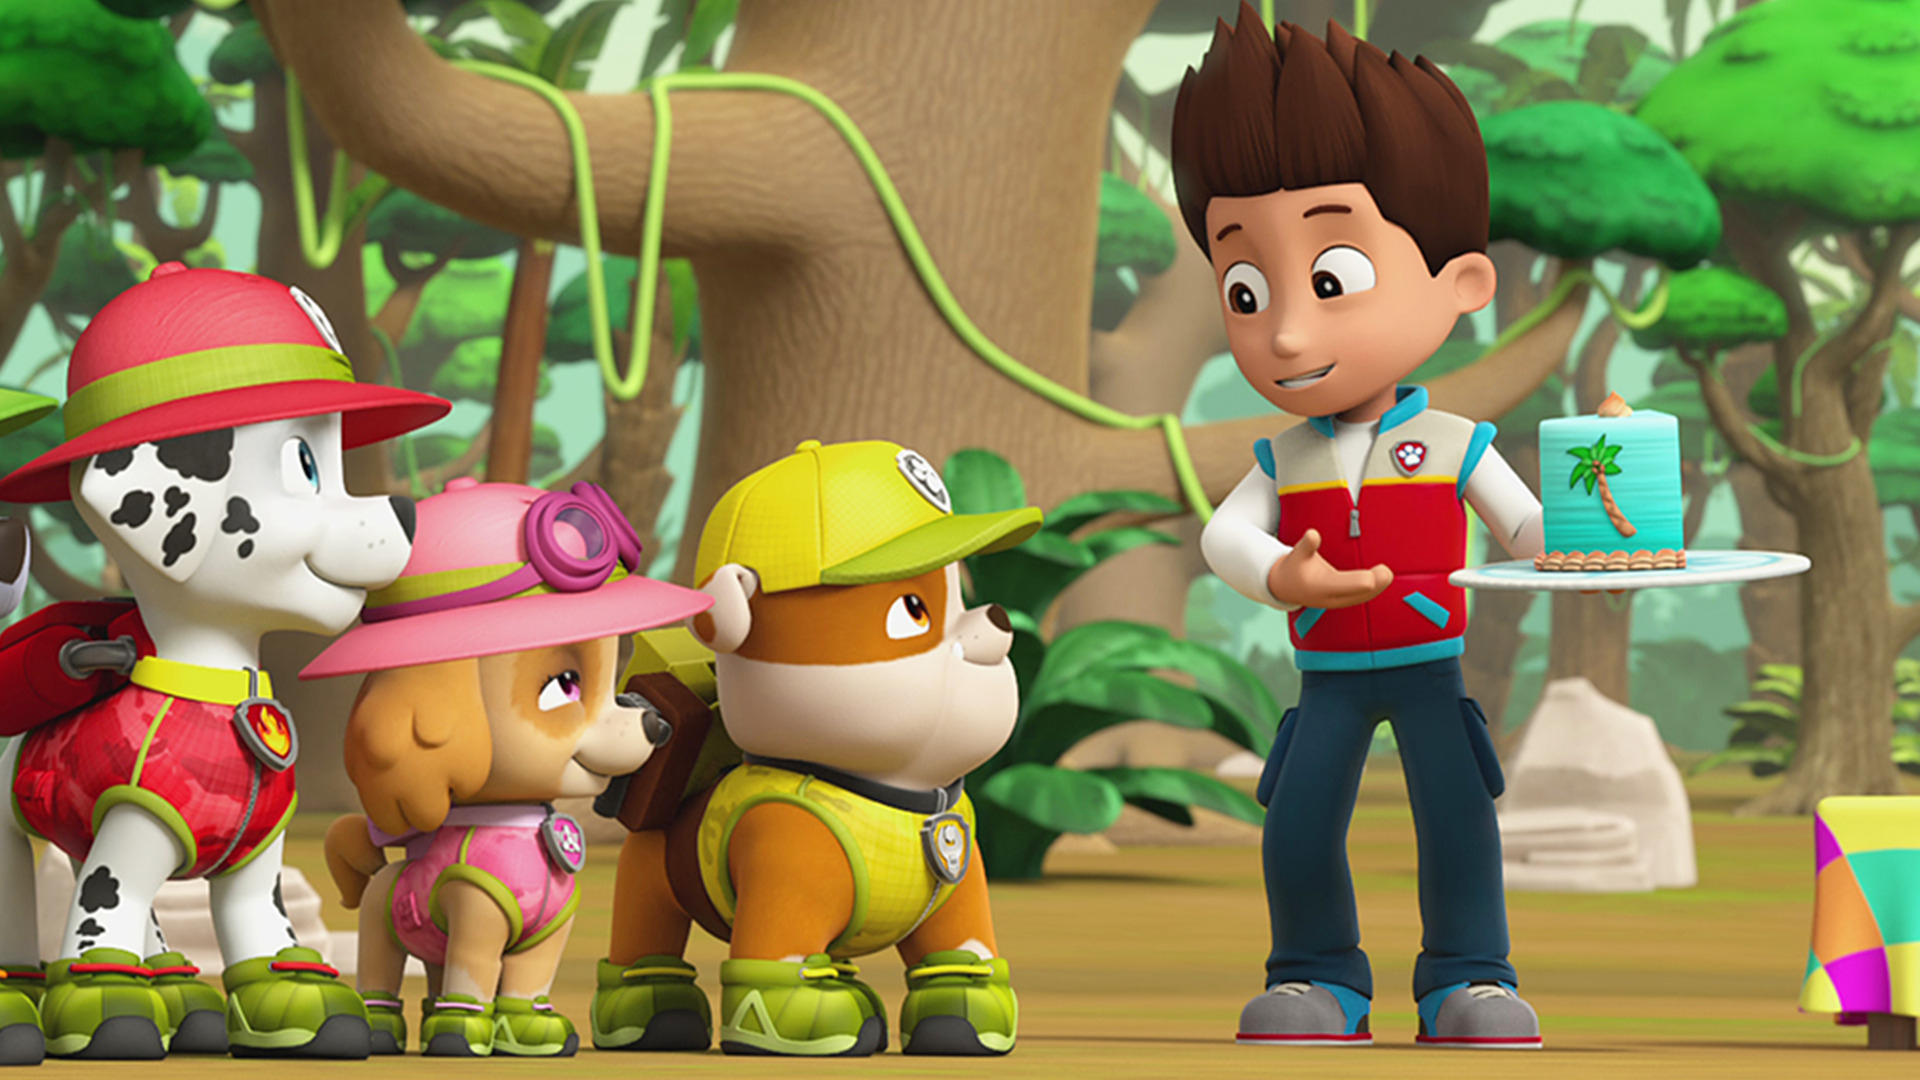 Punt inhoud Melodieus Watch PAW Patrol Season 4 Episode 18: Pups Save the Mail/Pups Save a Frog  Mayor - Full show on Paramount Plus